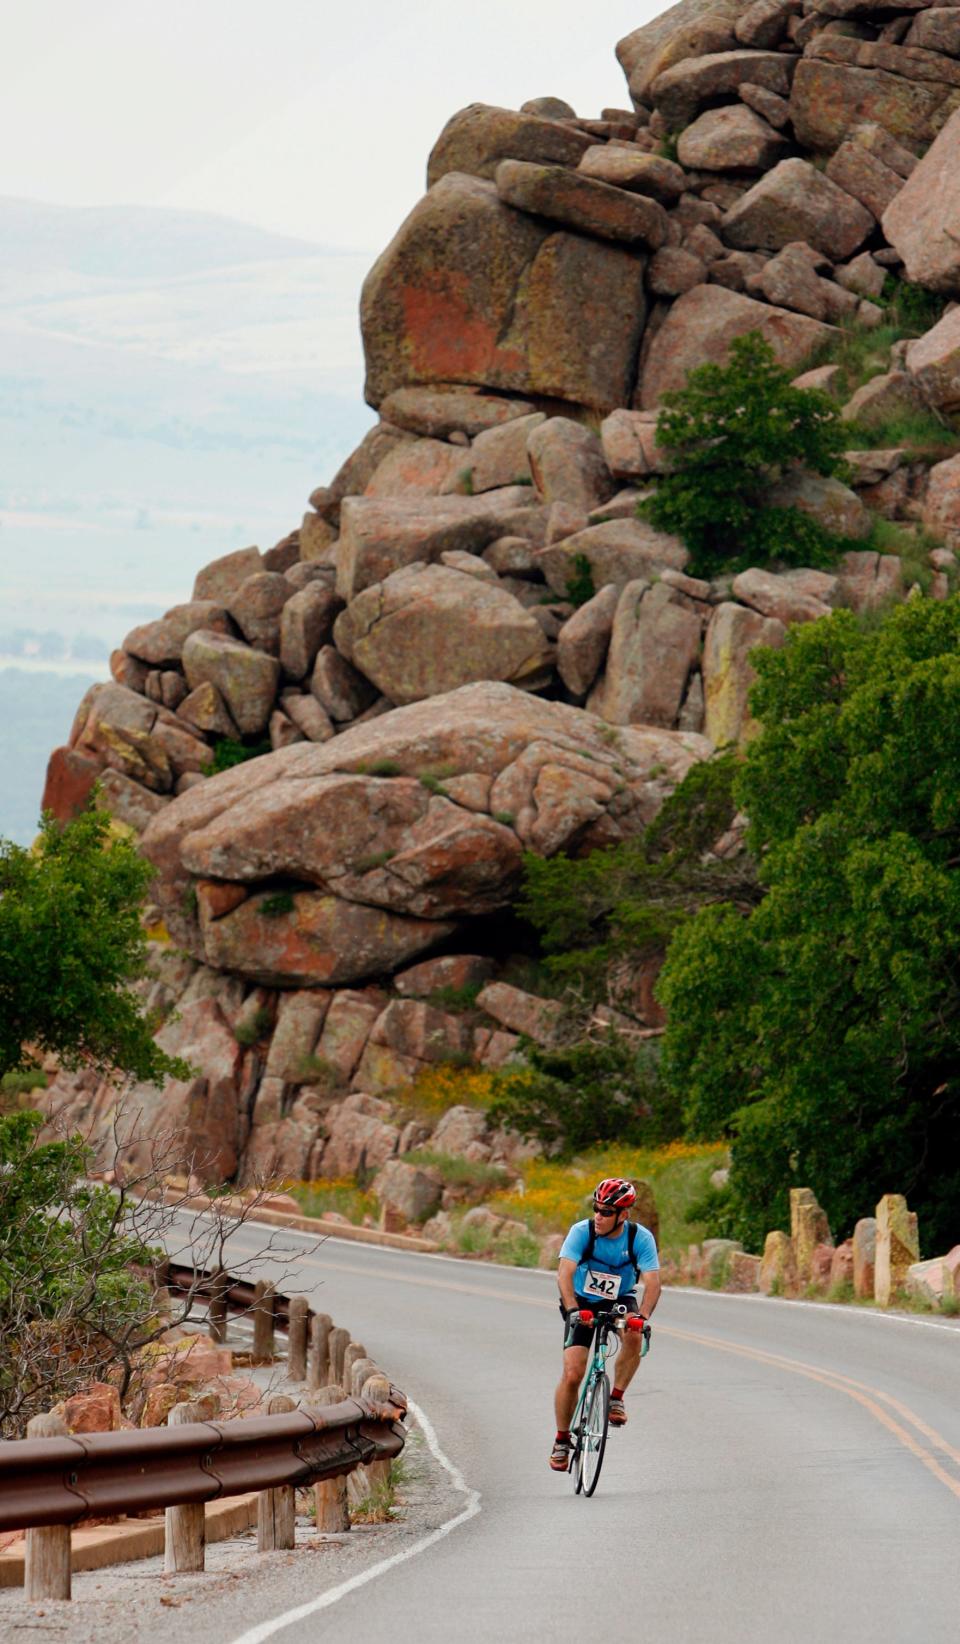 The Tour de Meers Bike Ride, an annual fundraising event for the Meers Volunteer Fire Department, offers cyclists varying lengths for the routes, including 10, 22, 36 or 60 miles, in the vicinity of Meers, Medicine Park and the Wichita Mountains Wildlife Refuge.